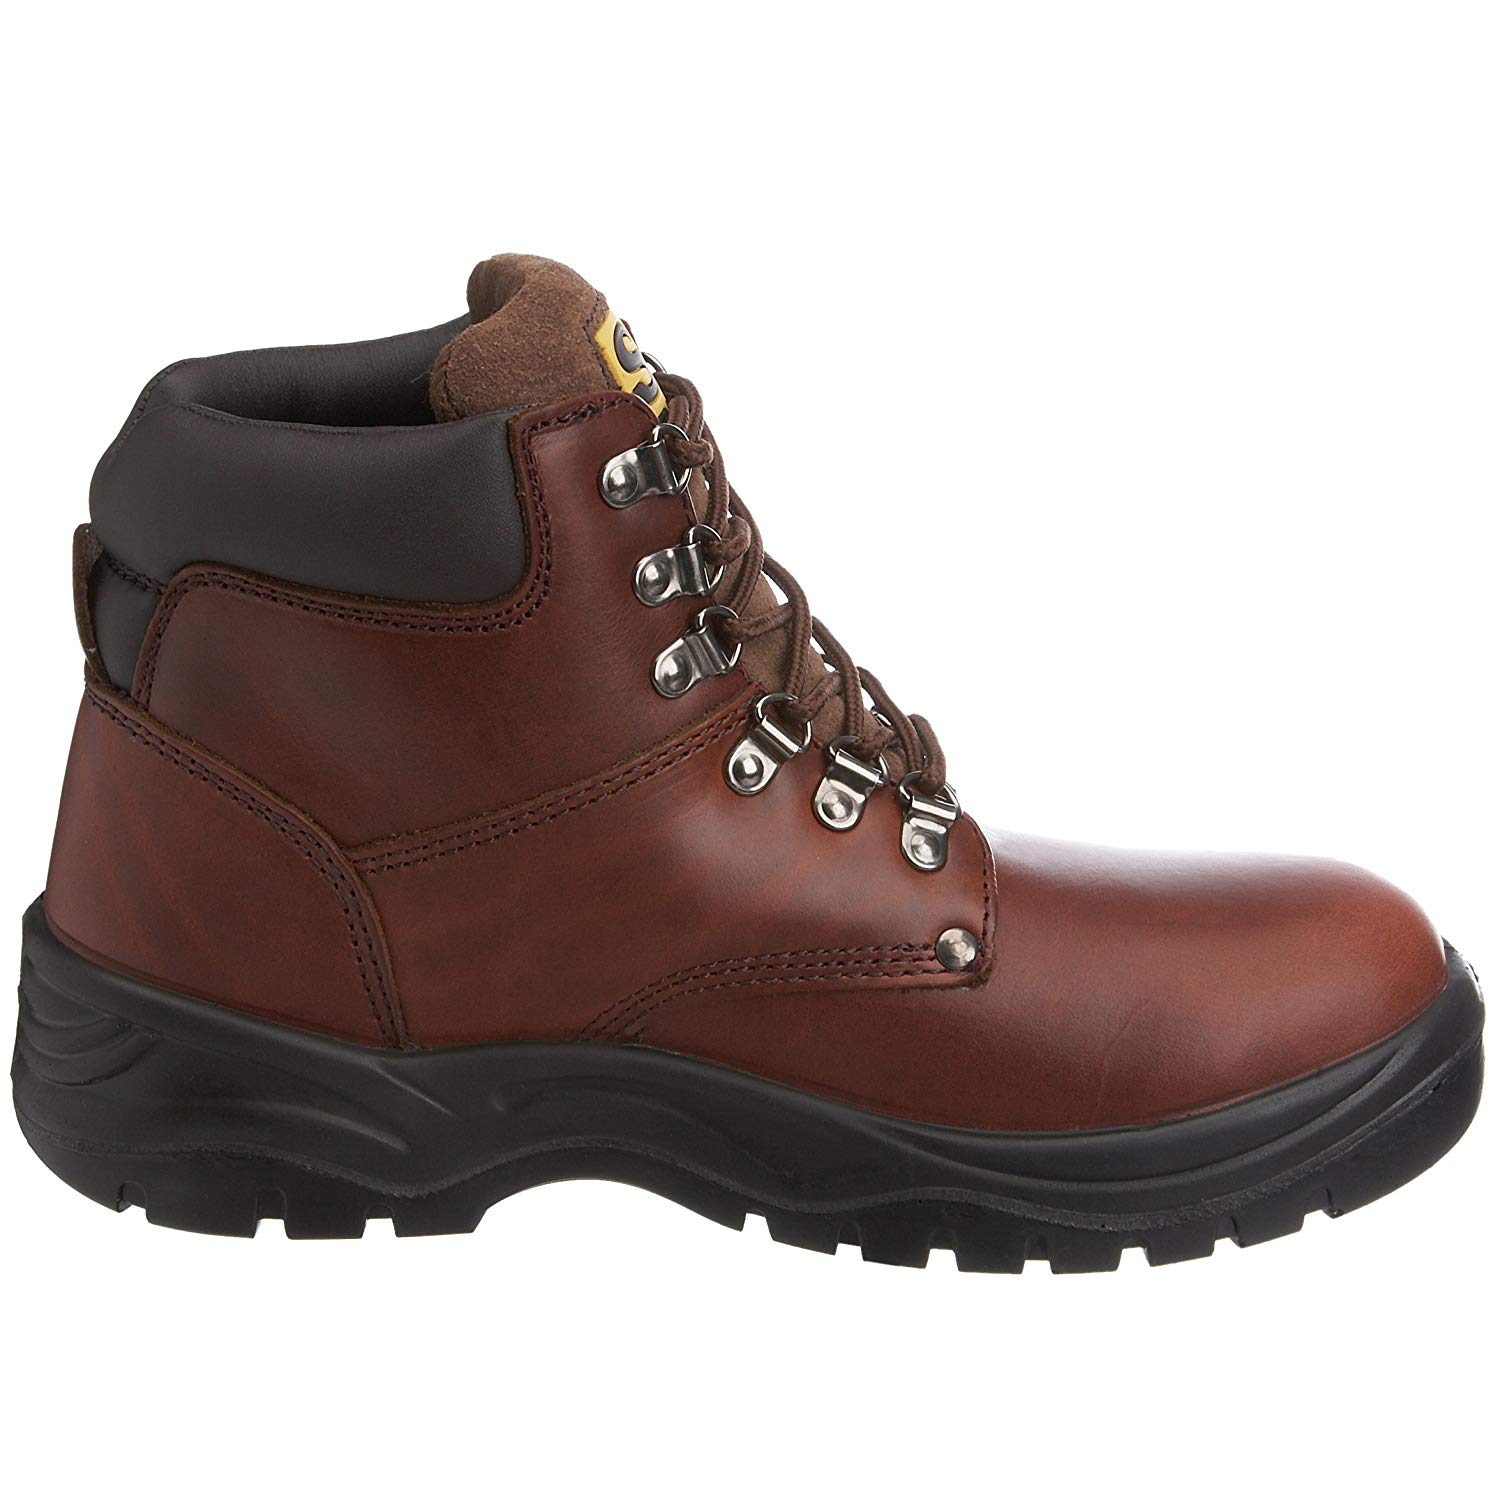 Sterling Lightweight Brown Safety Boots | Bodyguard Workwear